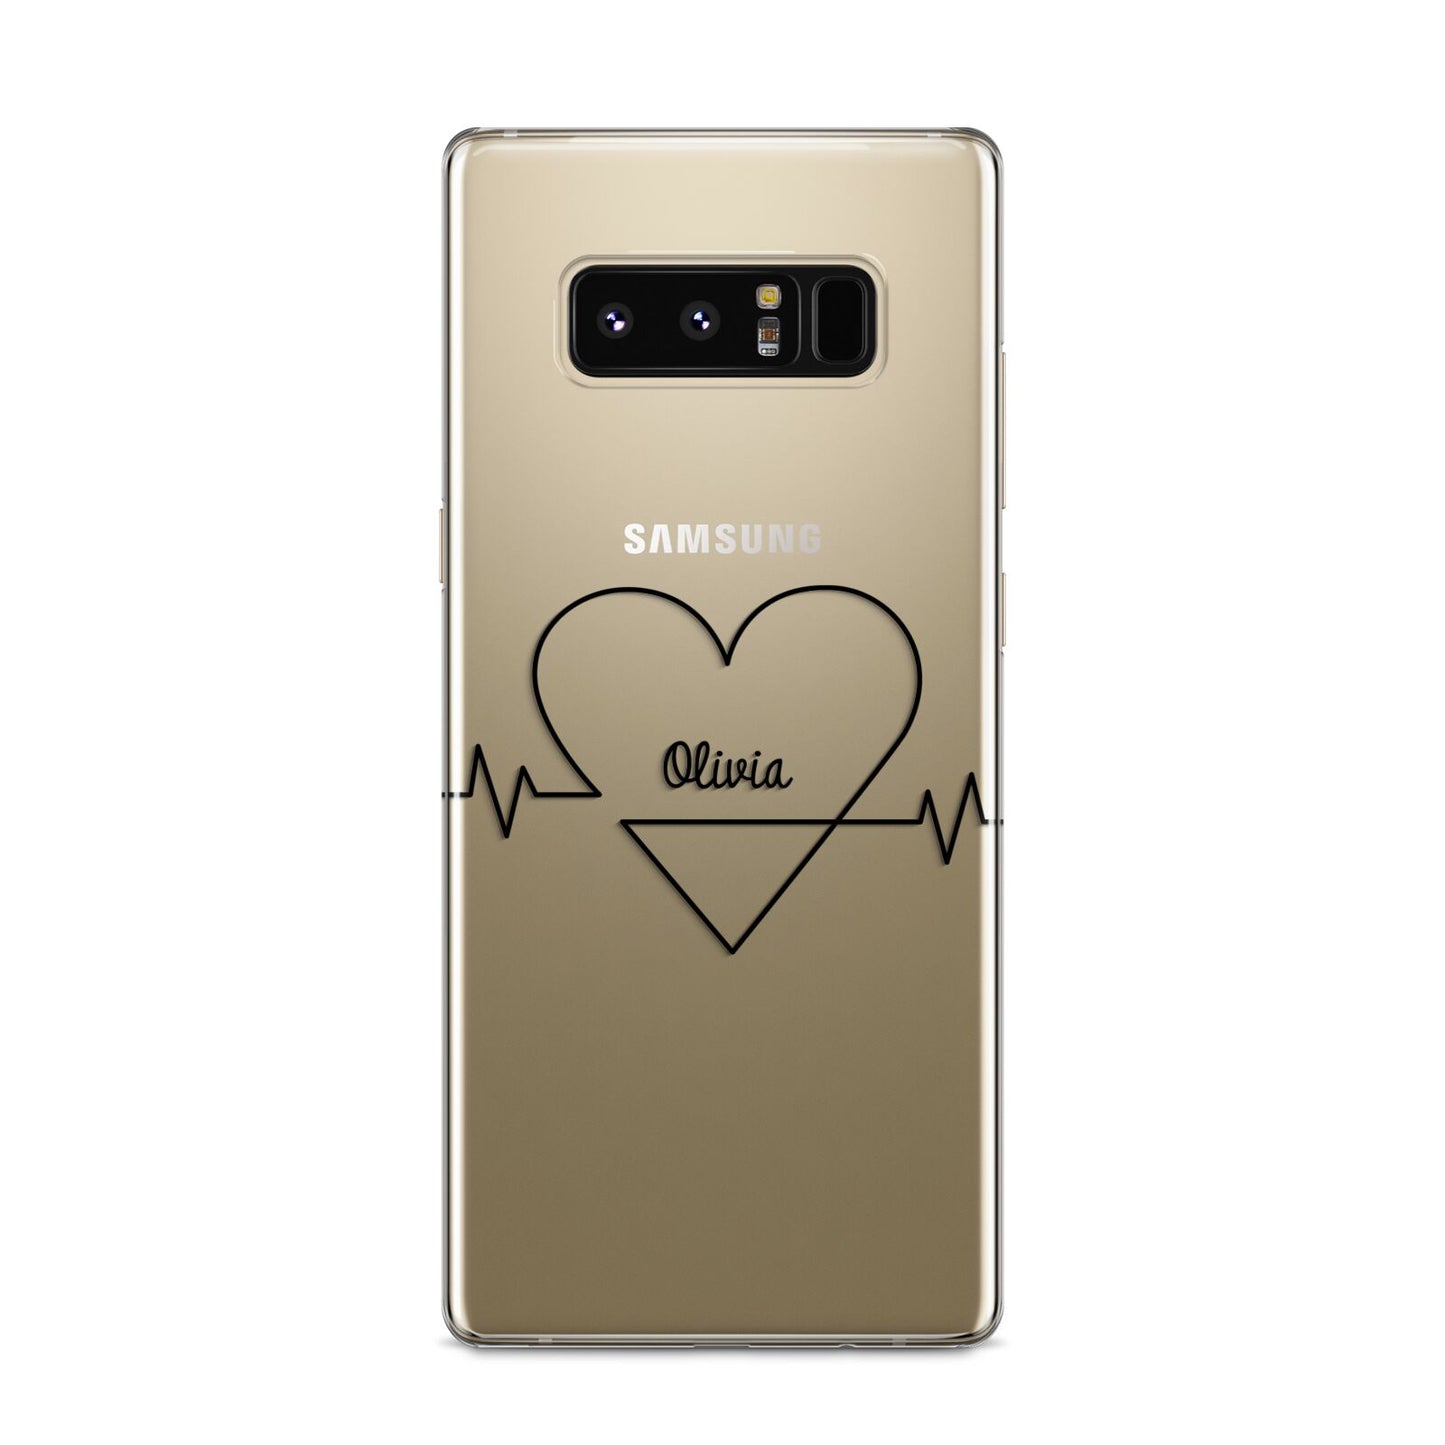 ECG Effect Heart Beats with Name Samsung Galaxy S8 Case